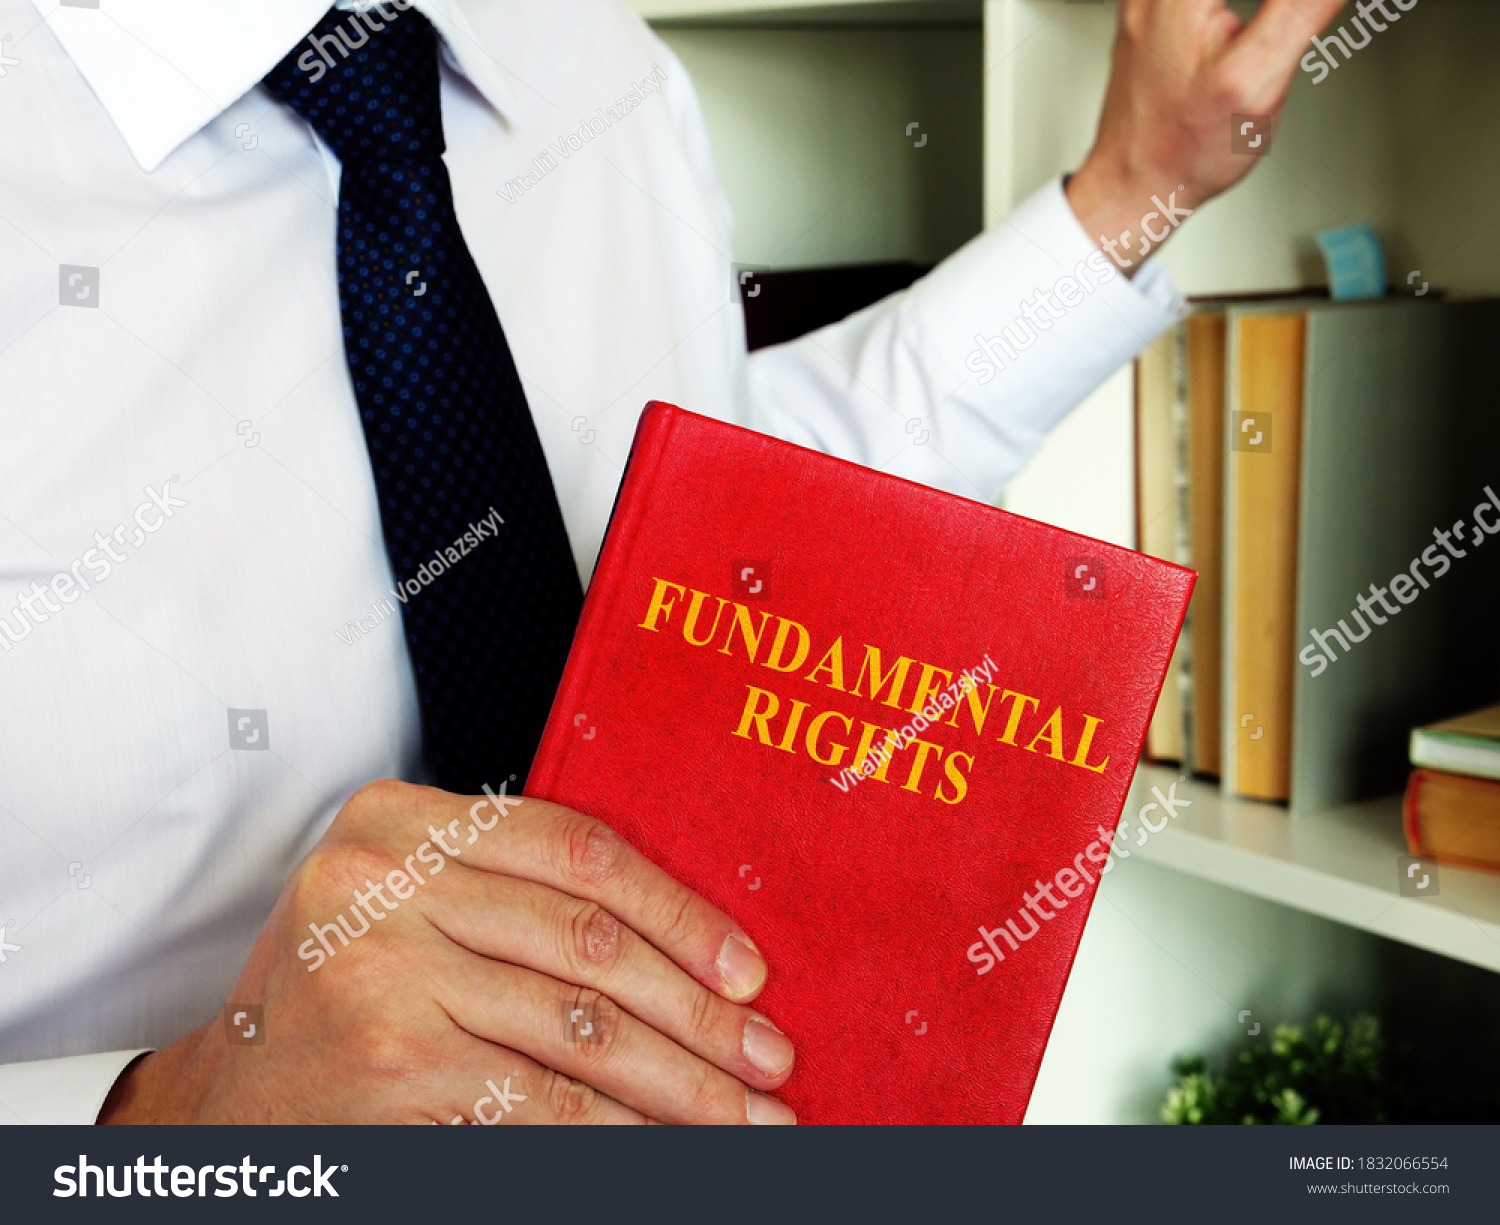 The Lawyer offers a book fundamental rights. #1832066554